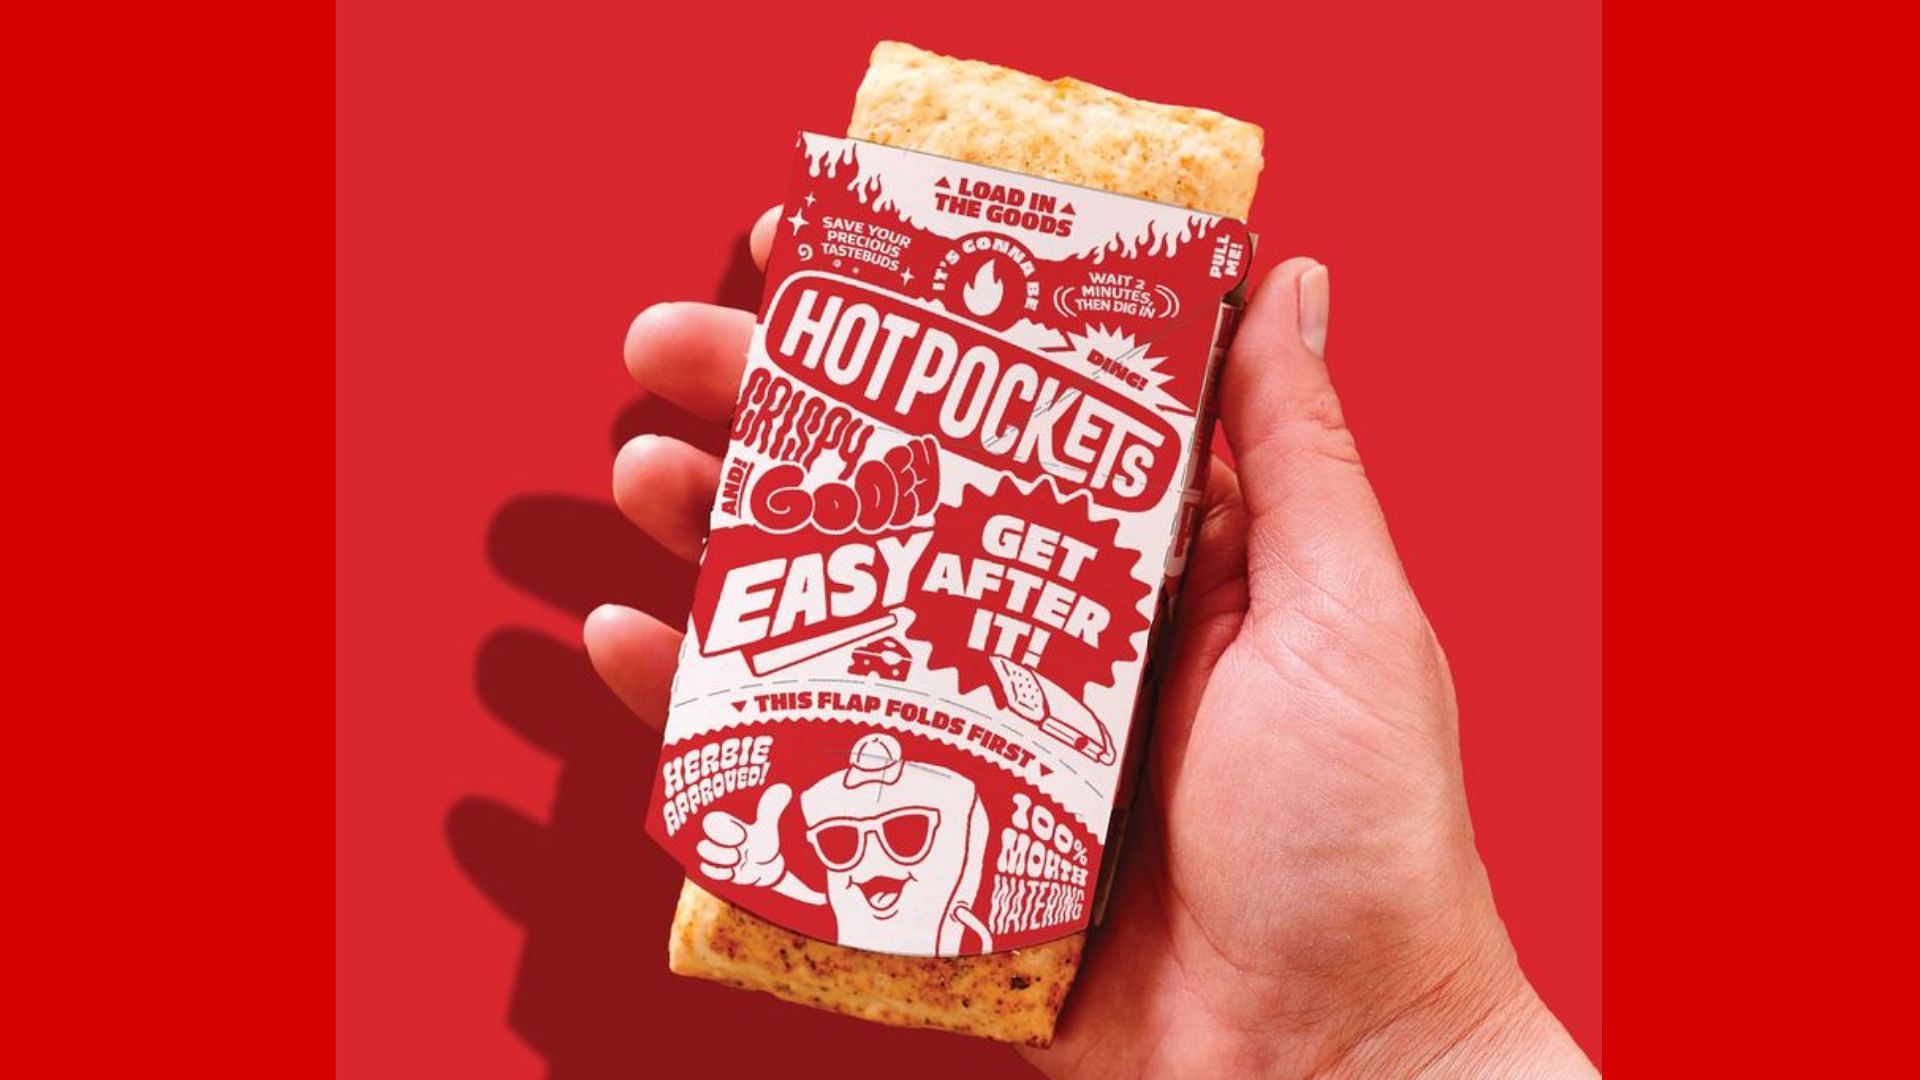 promotional image for a Hot Pockets Sandwich (Image via Interact Brands/Hot Pockets)